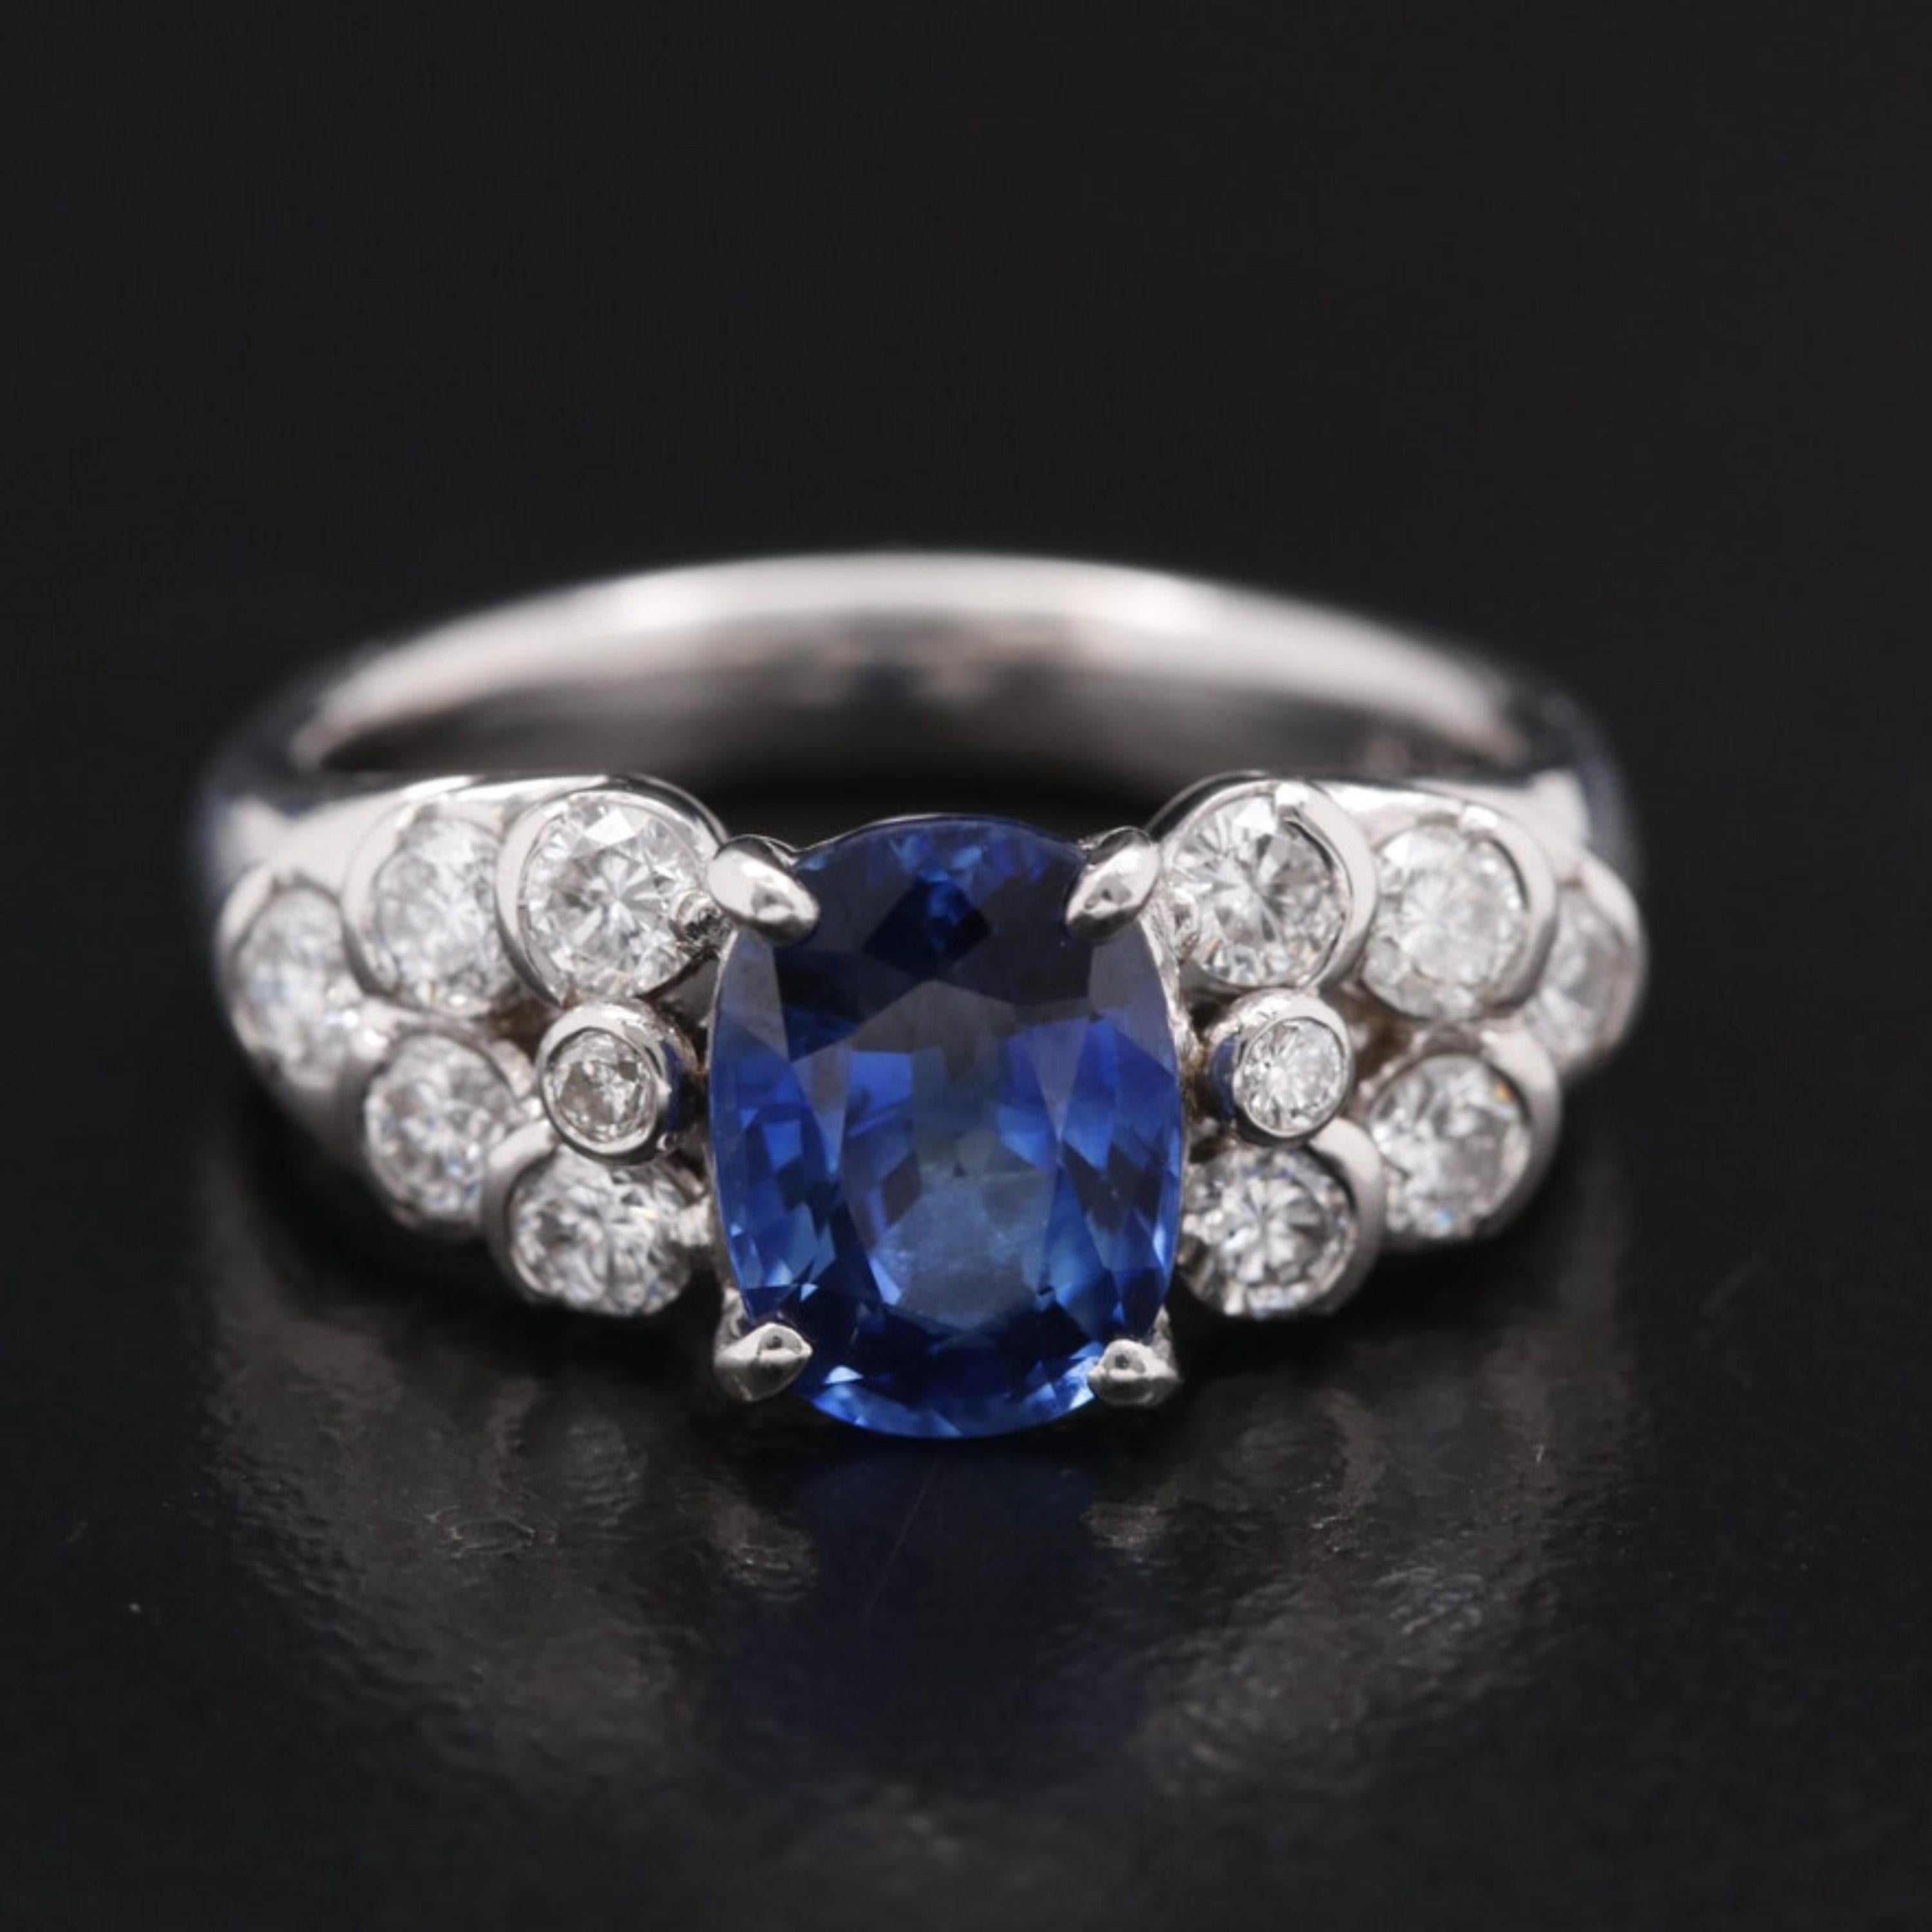 For Sale:  2.67 Carat Sapphire and Diamond White Gold Engagement Ring Bridal Statement Ring 3